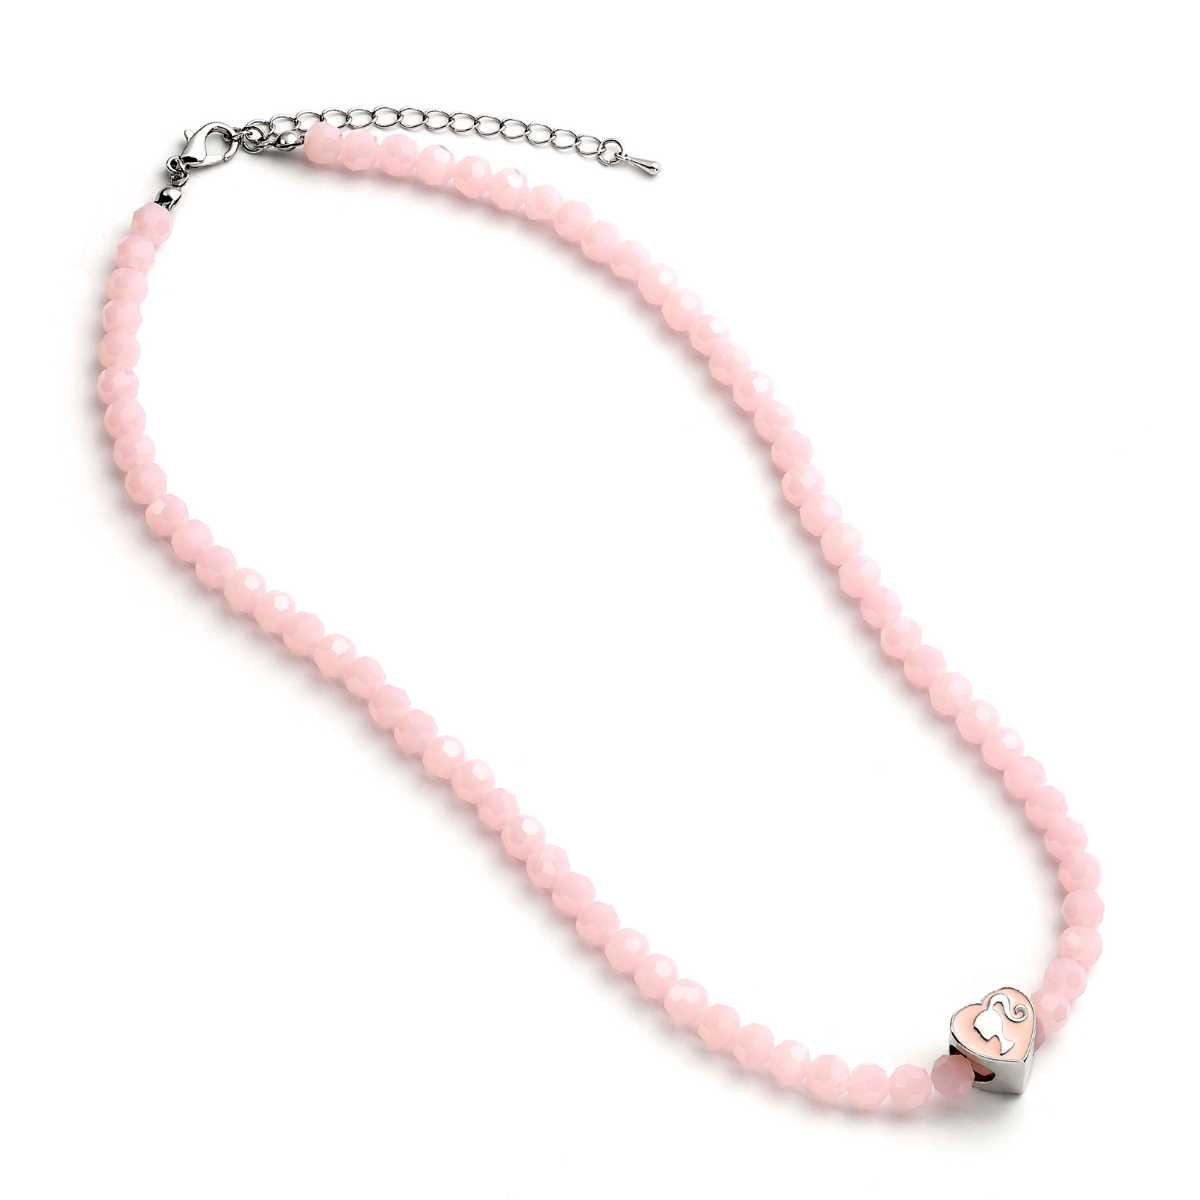 Barbie™️ Pink Bead Necklace with Heart Shaped Silhouette Bead Charm - Barbie x Carat Shop - Simon's Collectibles